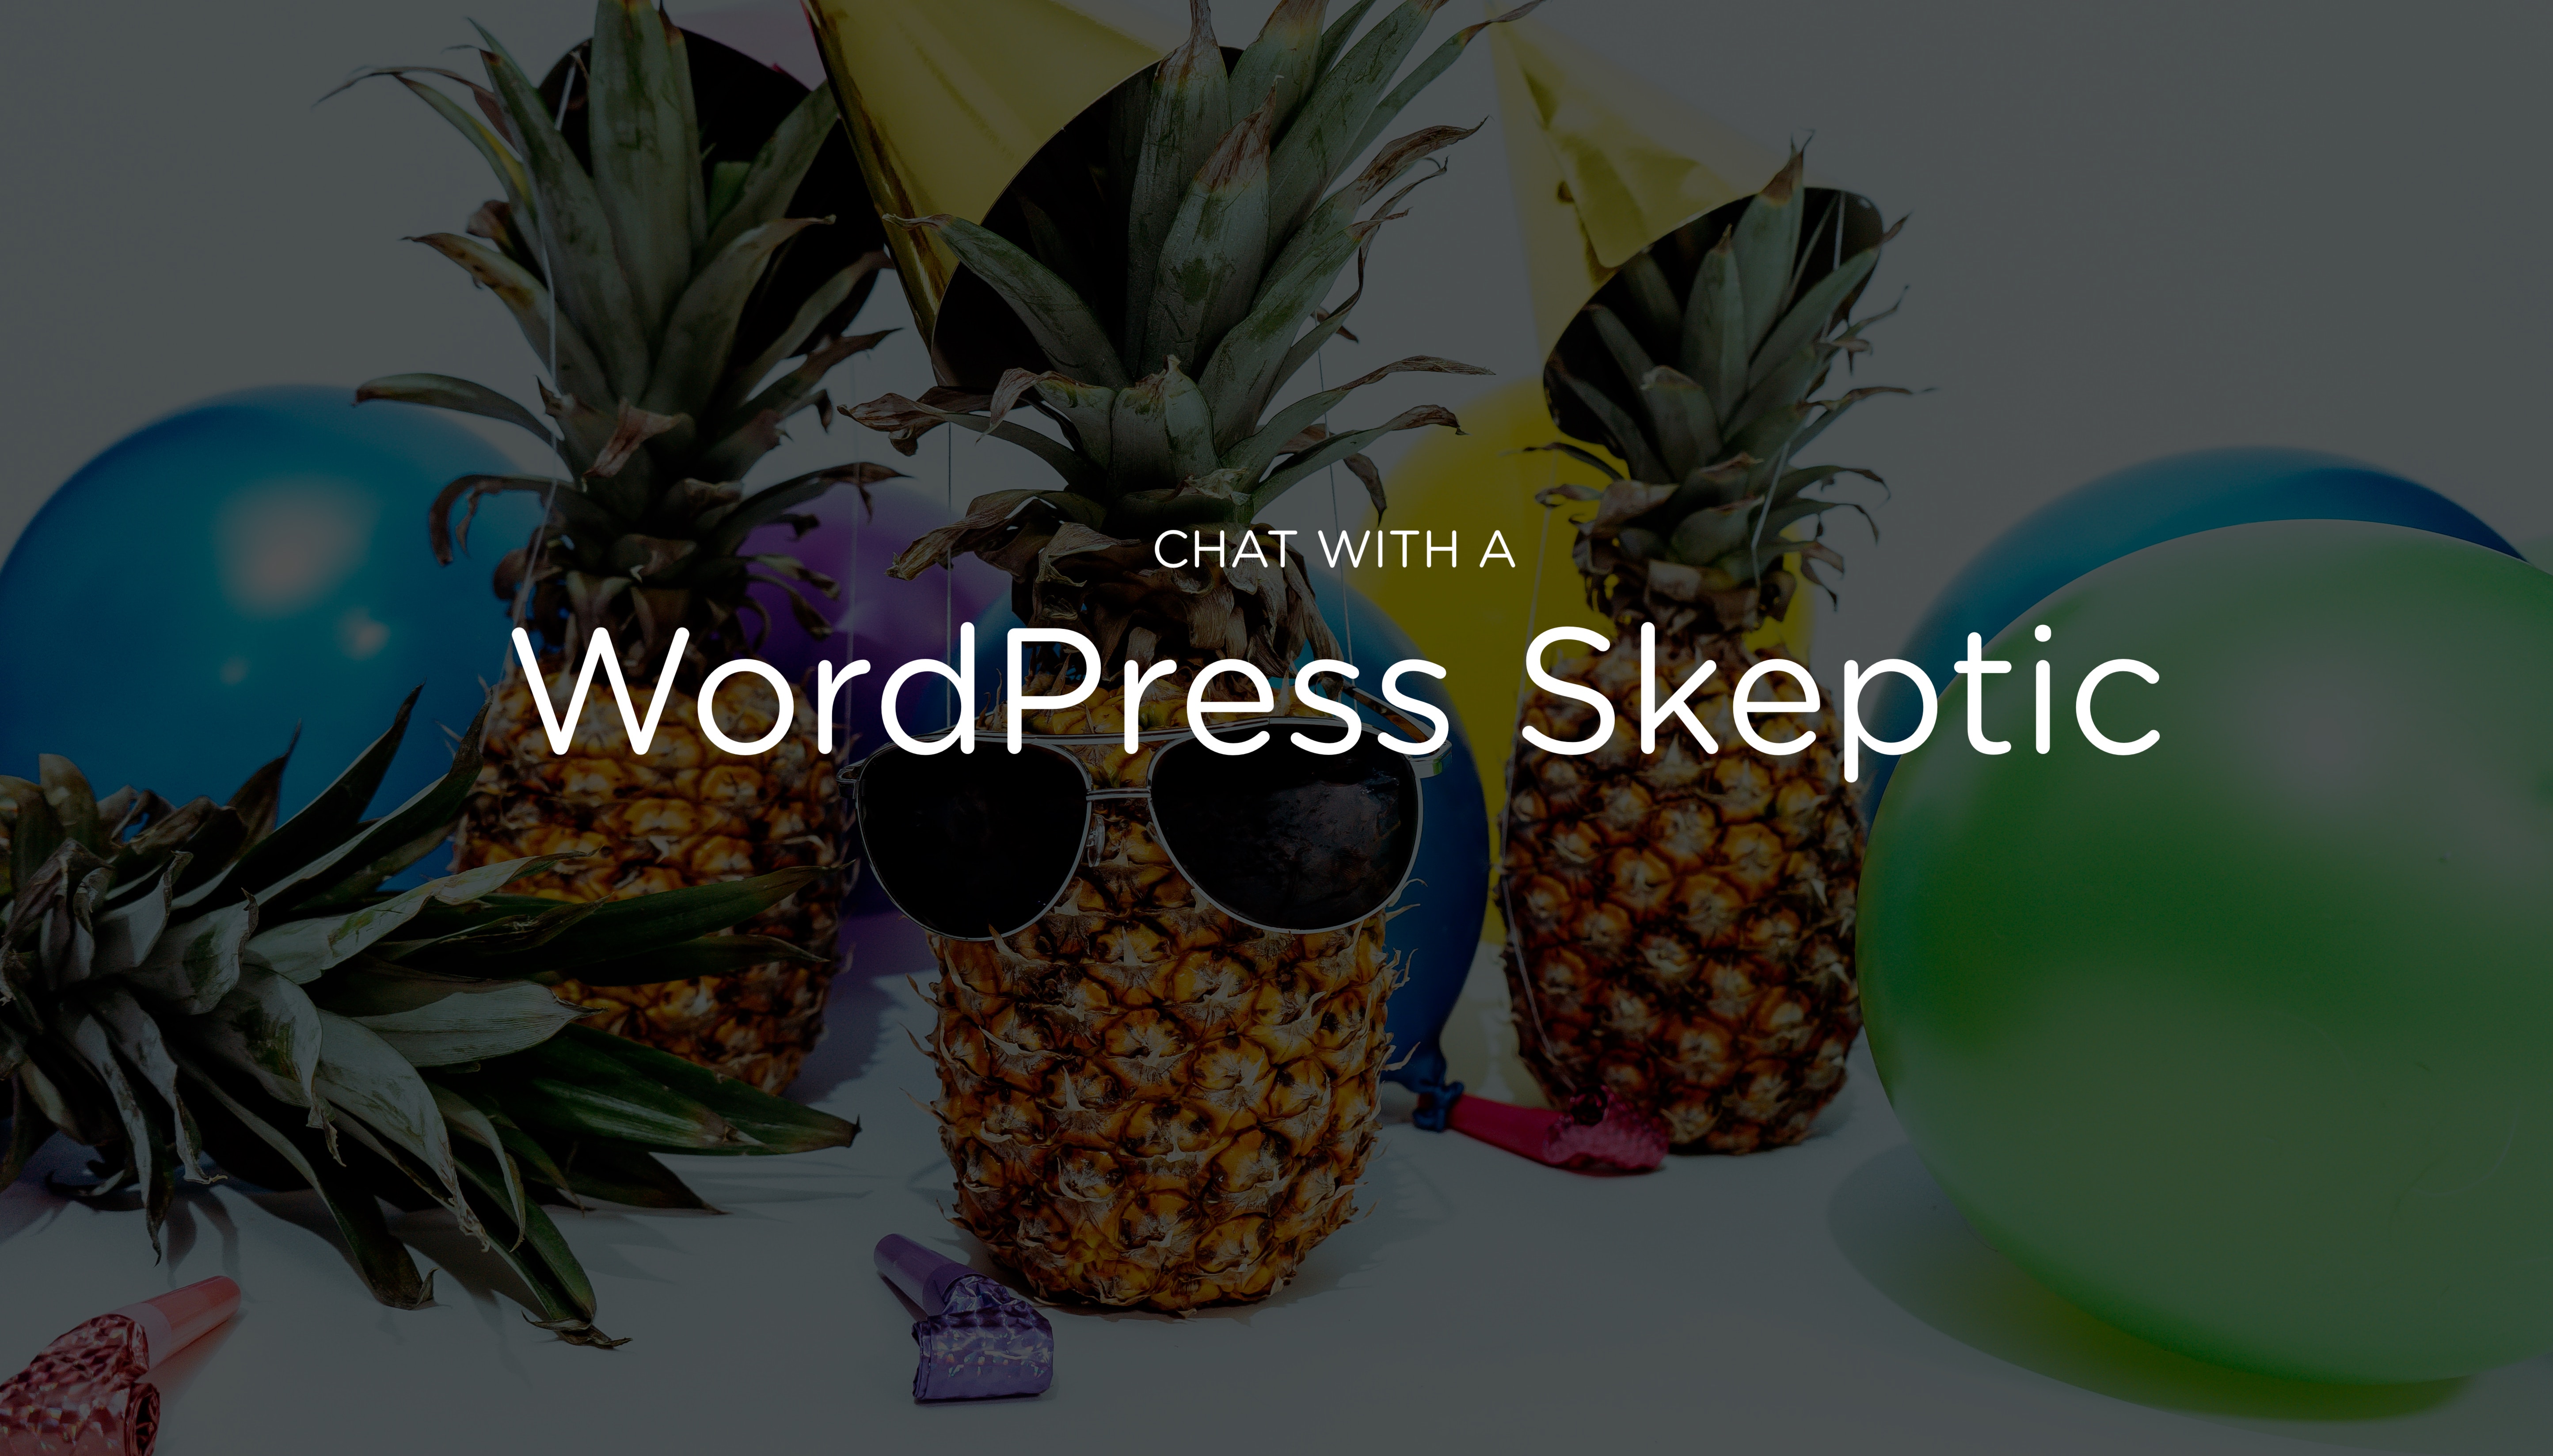 Chat with a WordPress skeptic